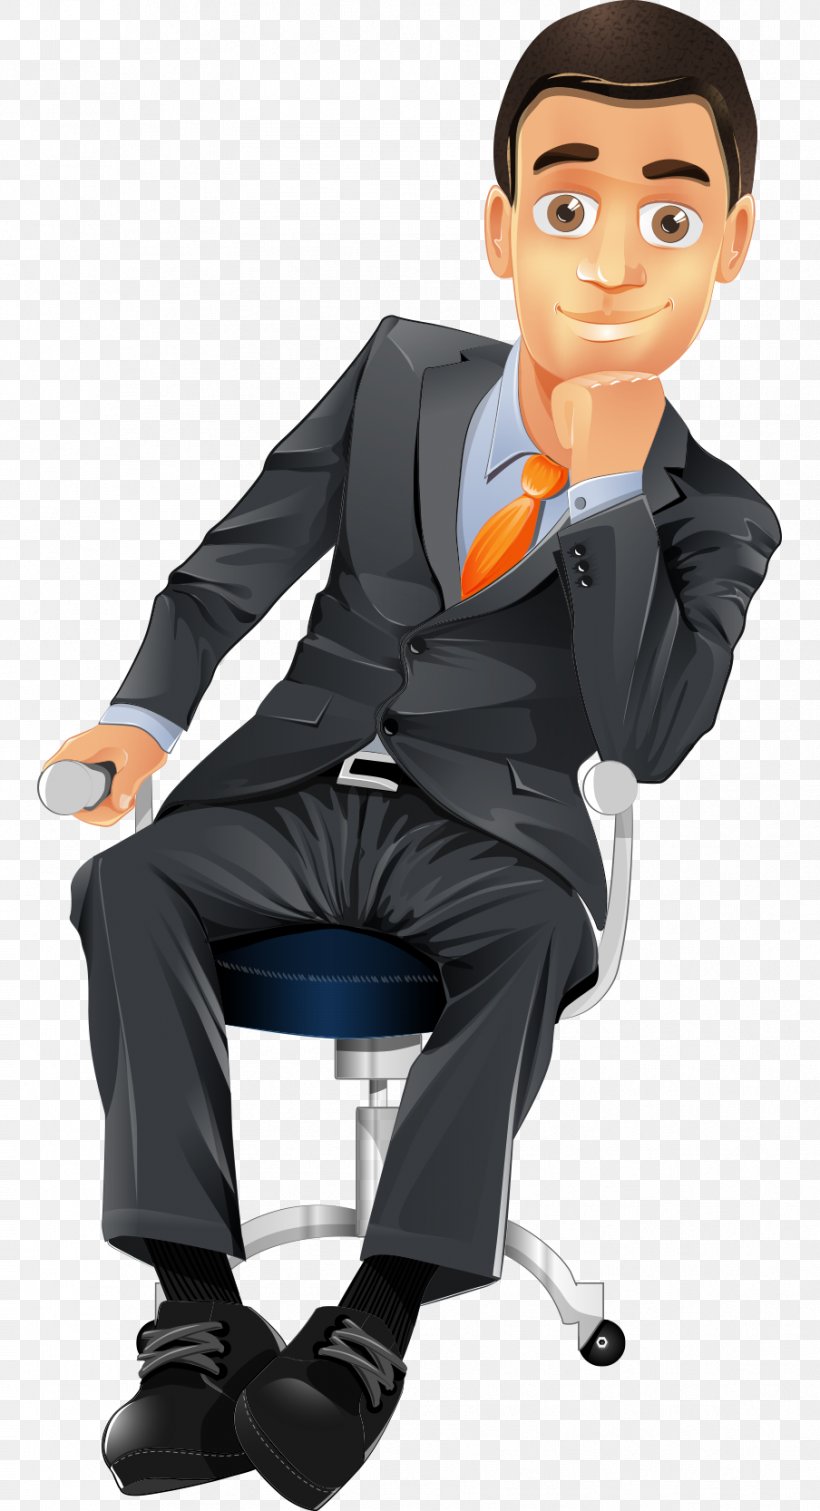 Cartoon Character Businessperson, PNG, 904x1666px, Businessperson, Business, Business Executive, Cartoon, Character Download Free